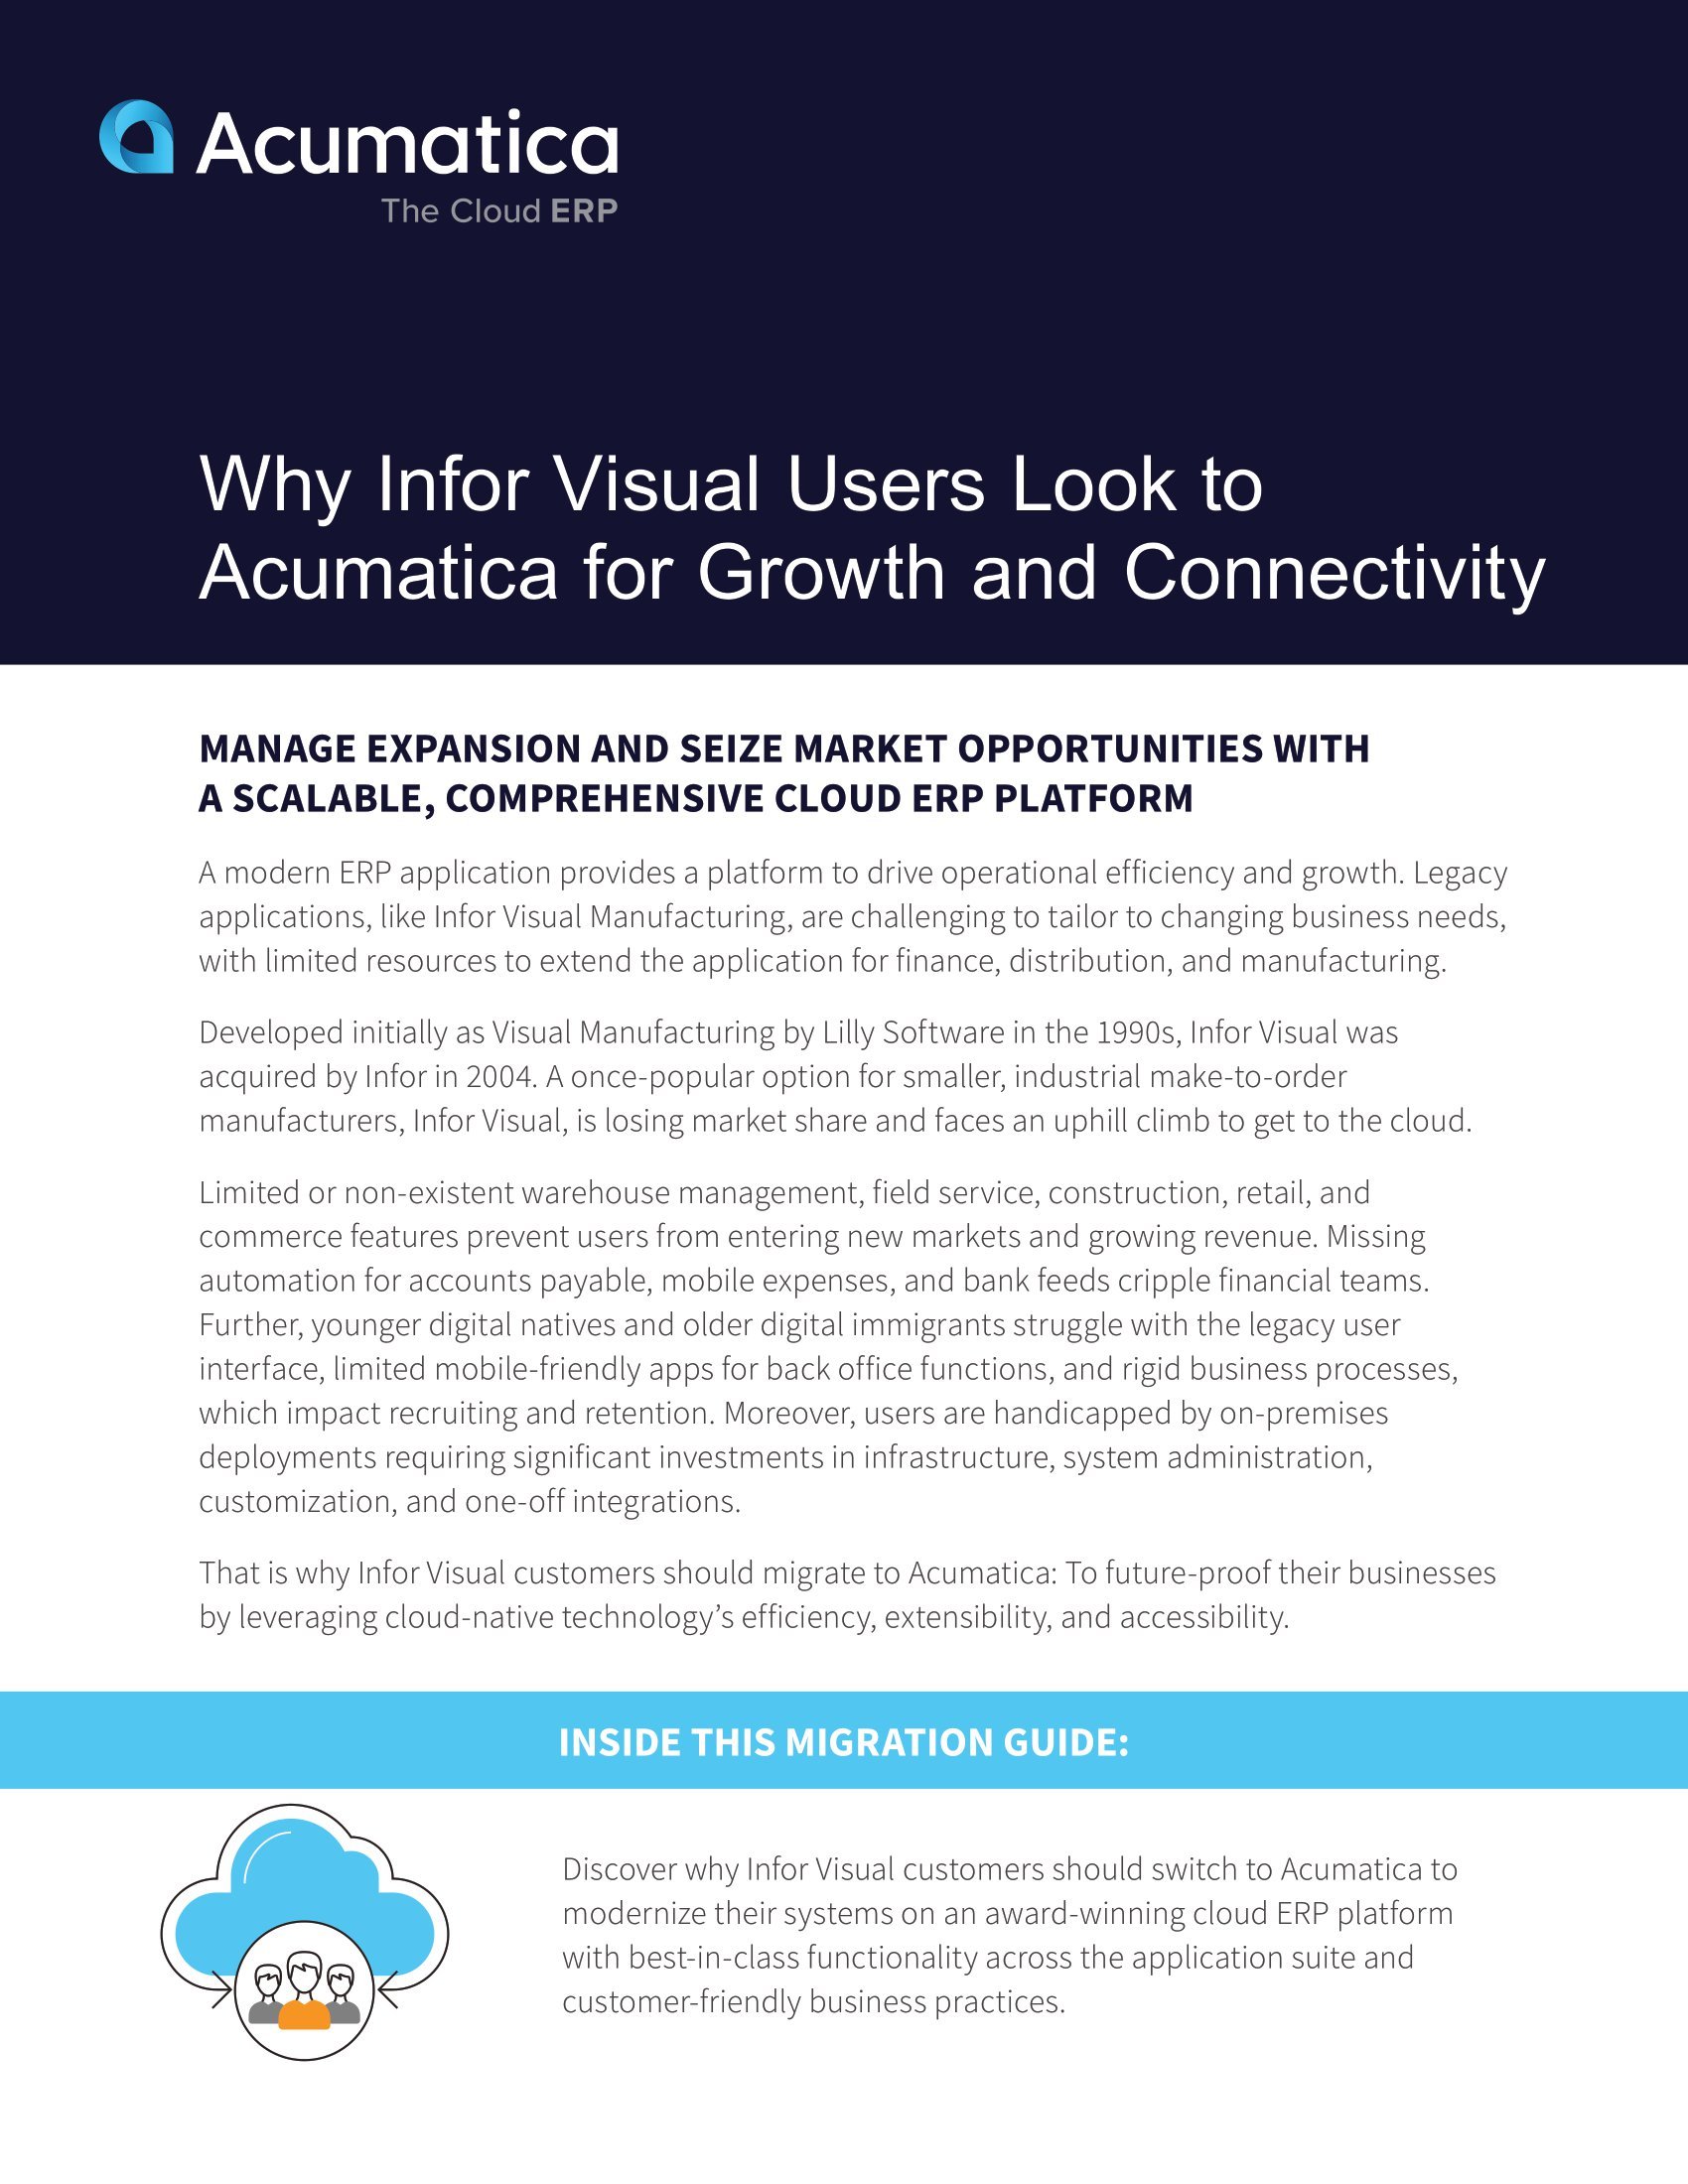 An Infor Visual Migration Guide Reveals Why Today’s Manufacturers Should Switch to Acumatica